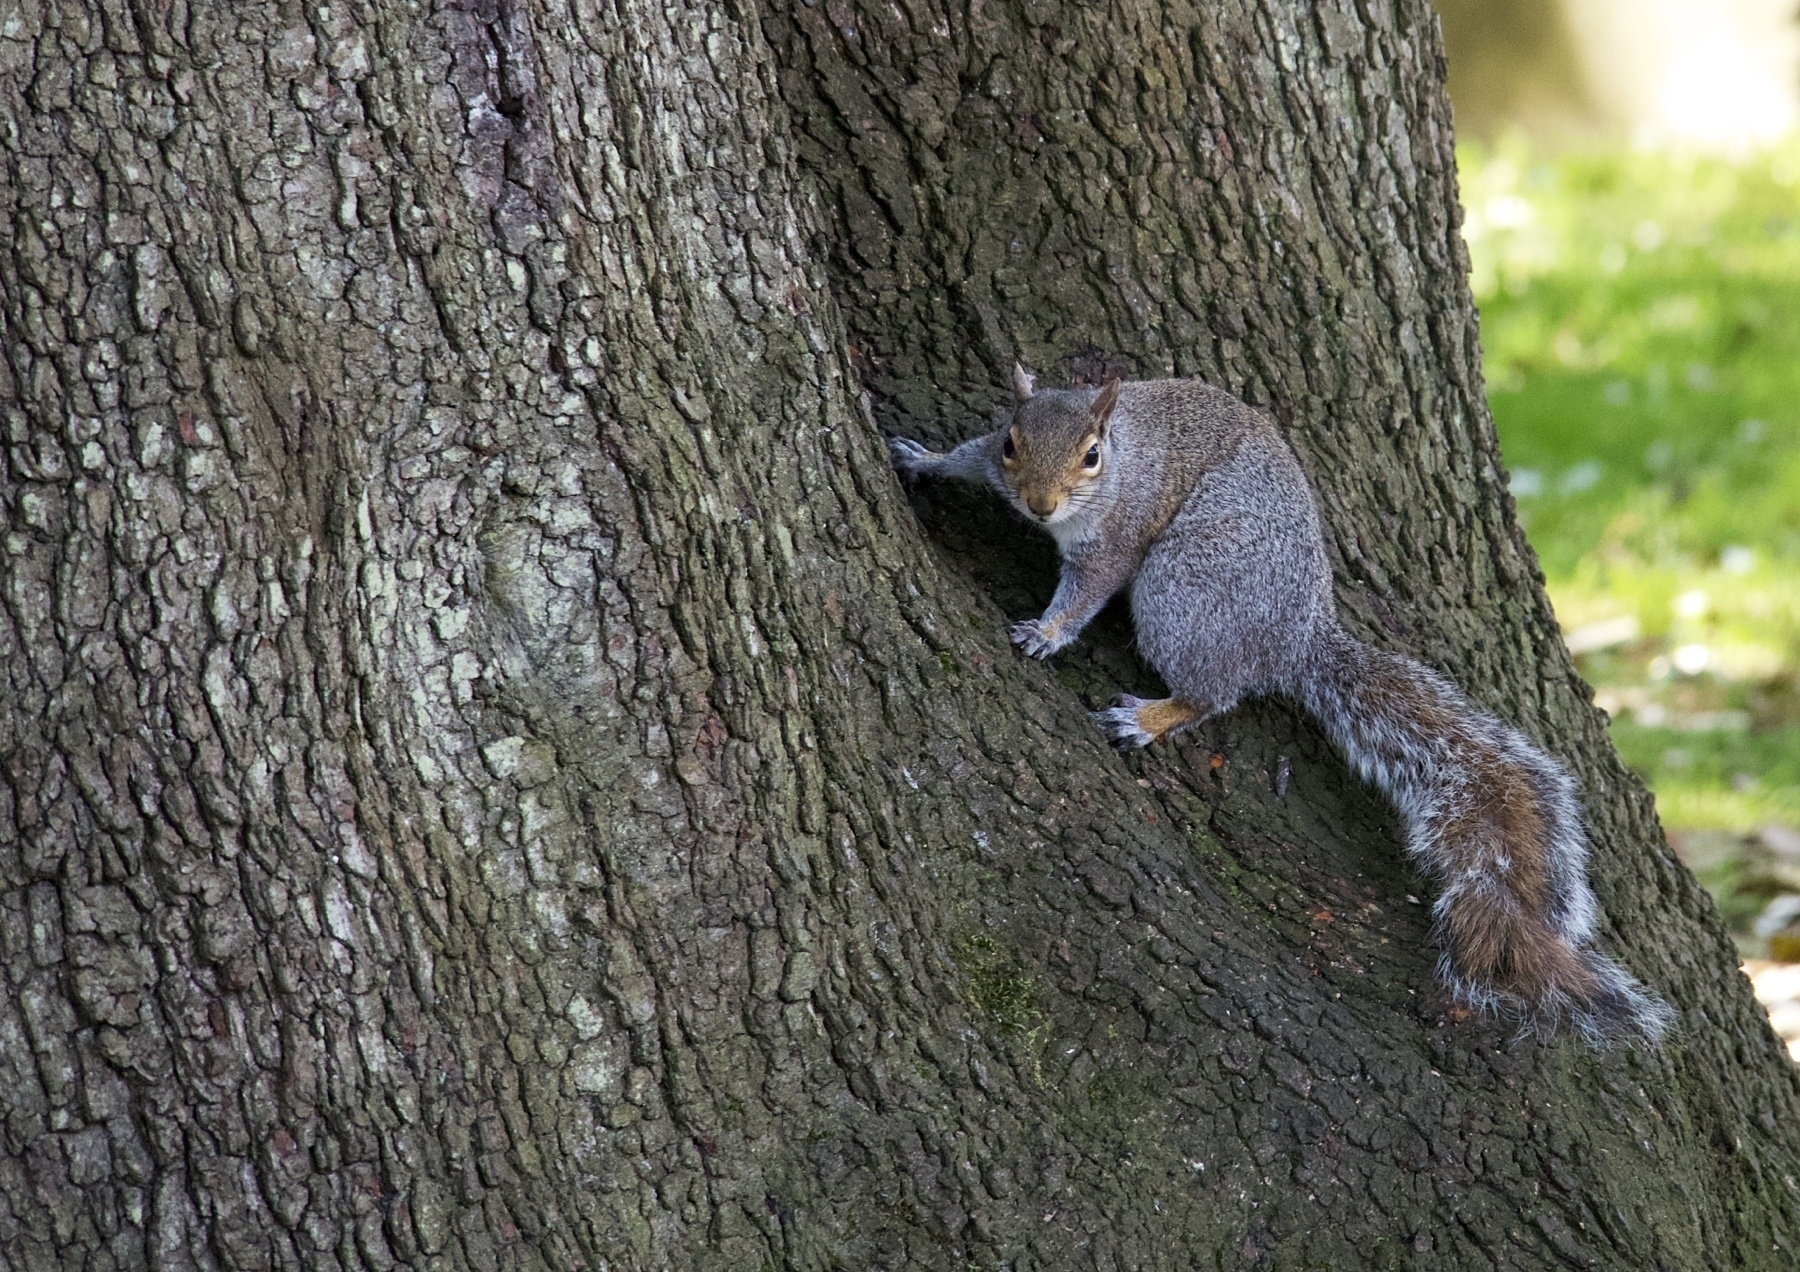 A squirrel in the churchyard of St Mary de Haura.